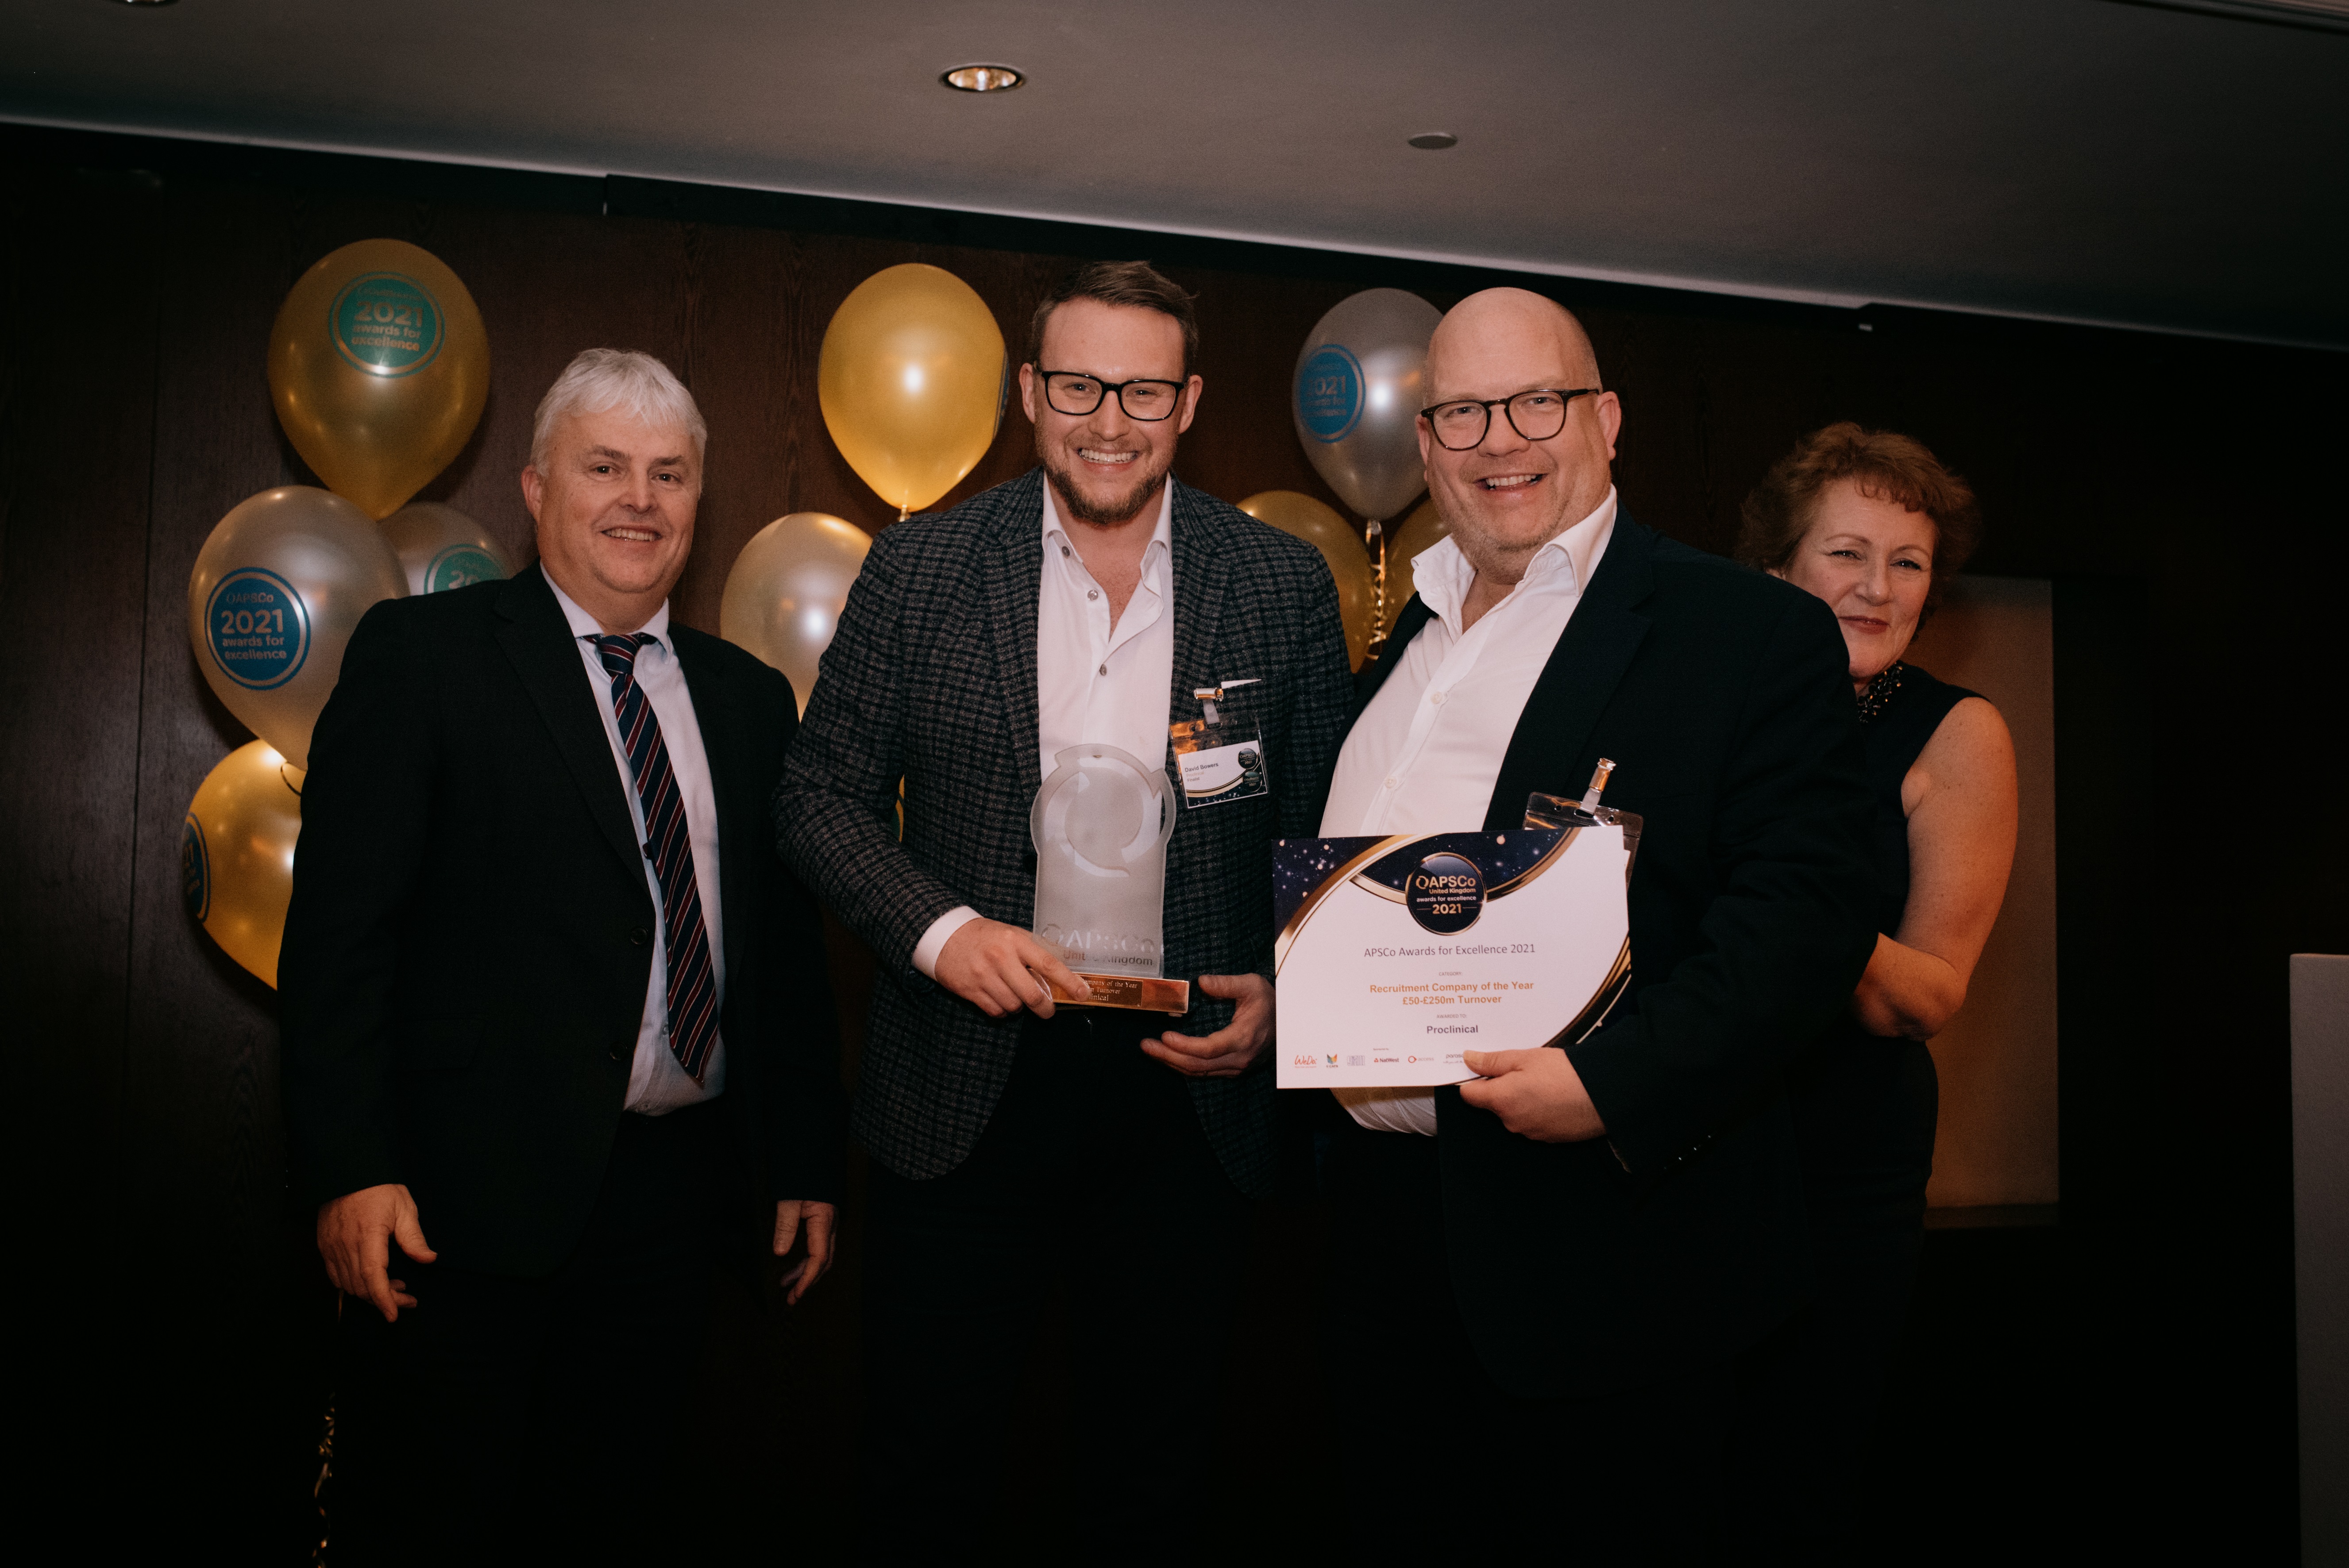 Proclinical celebrates being named Recruitment Company of the Year 2021